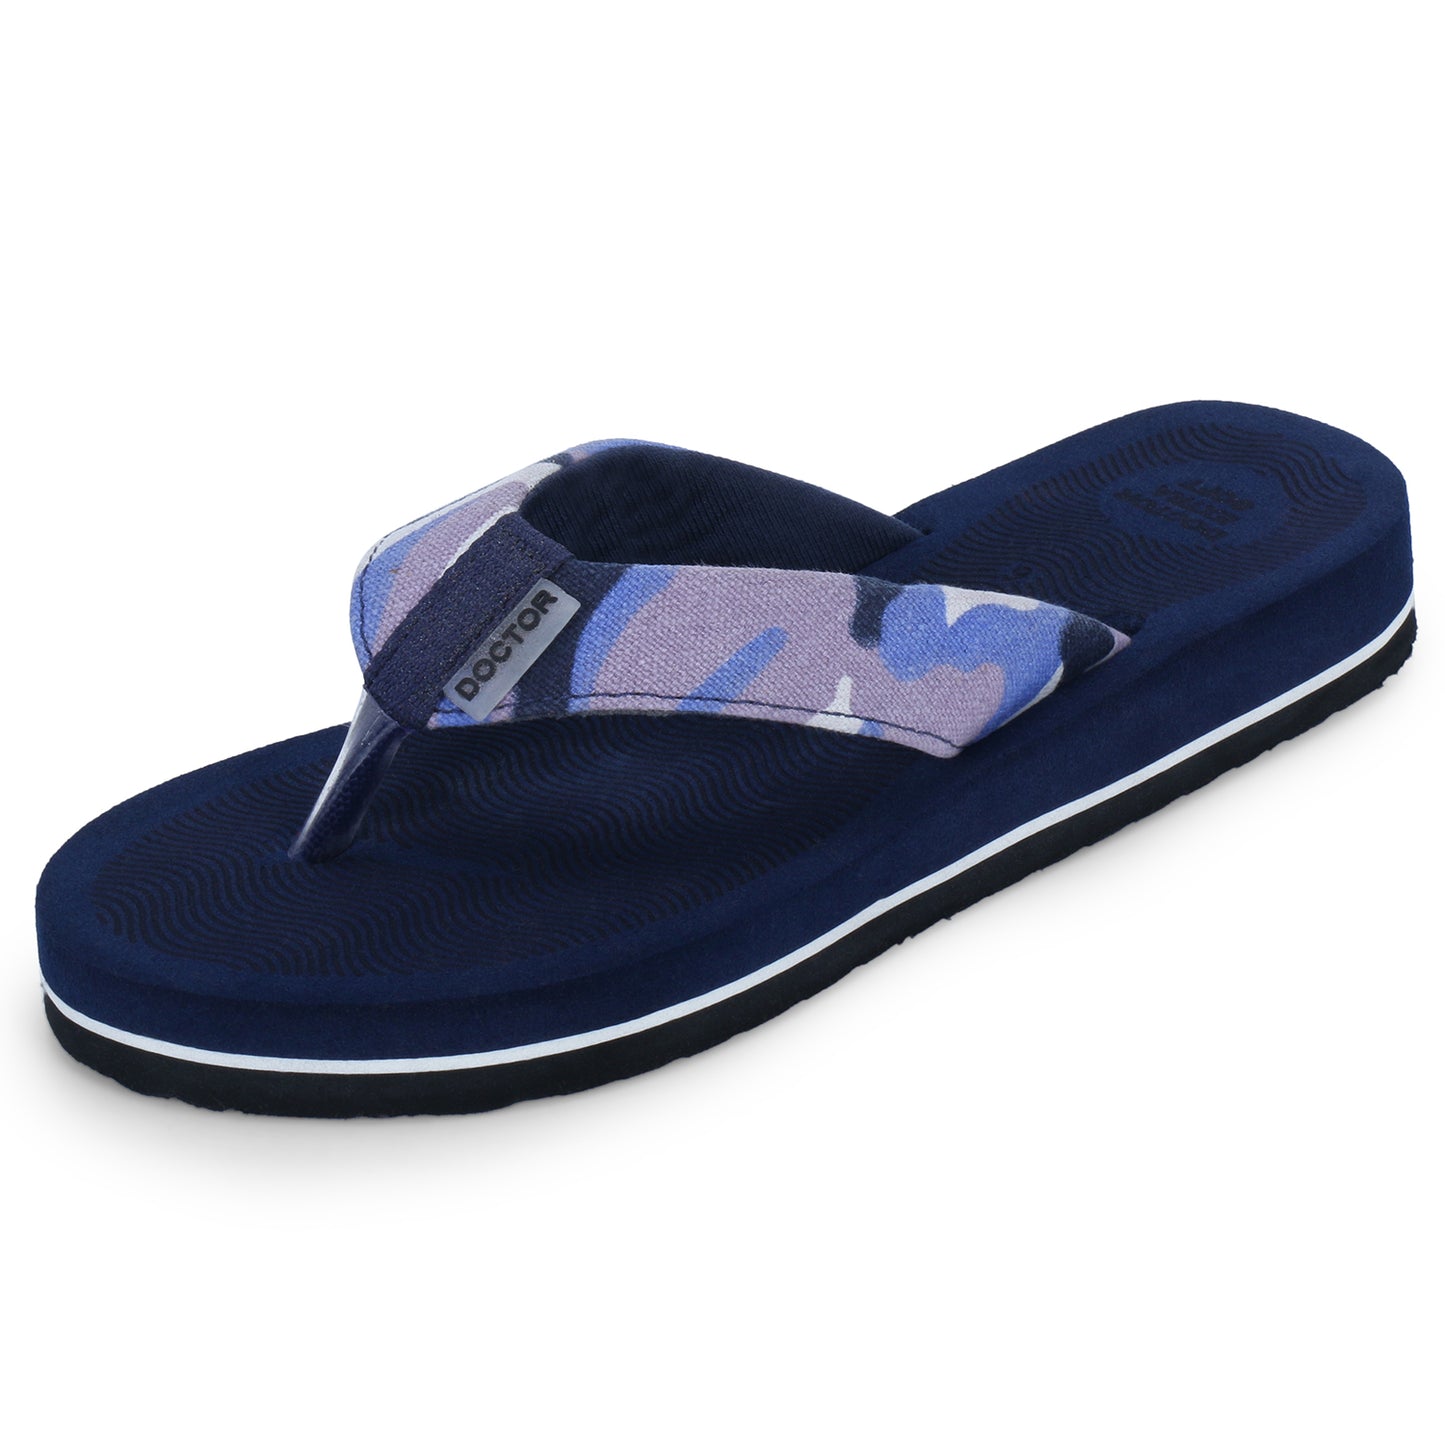 DOCTOR EXTRA SOFT D-56 House Slipper for Women's Camo | Pregnancy | Orthopaedic & Diabetic